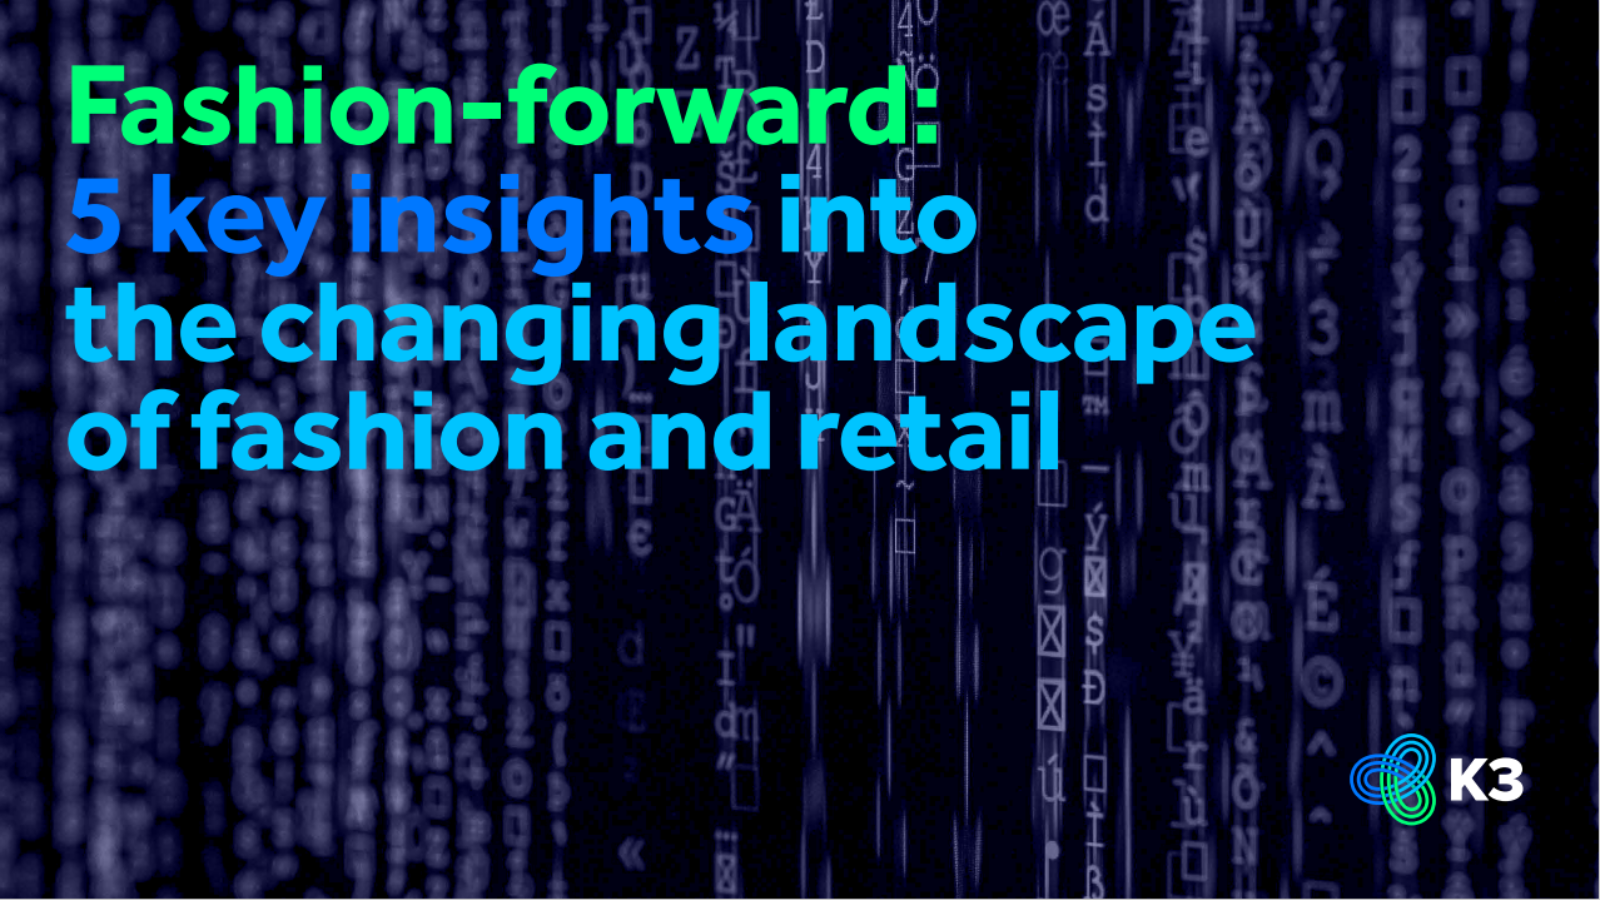 Fashion-forward: 5 key insights the changing landscape of fashion and retail